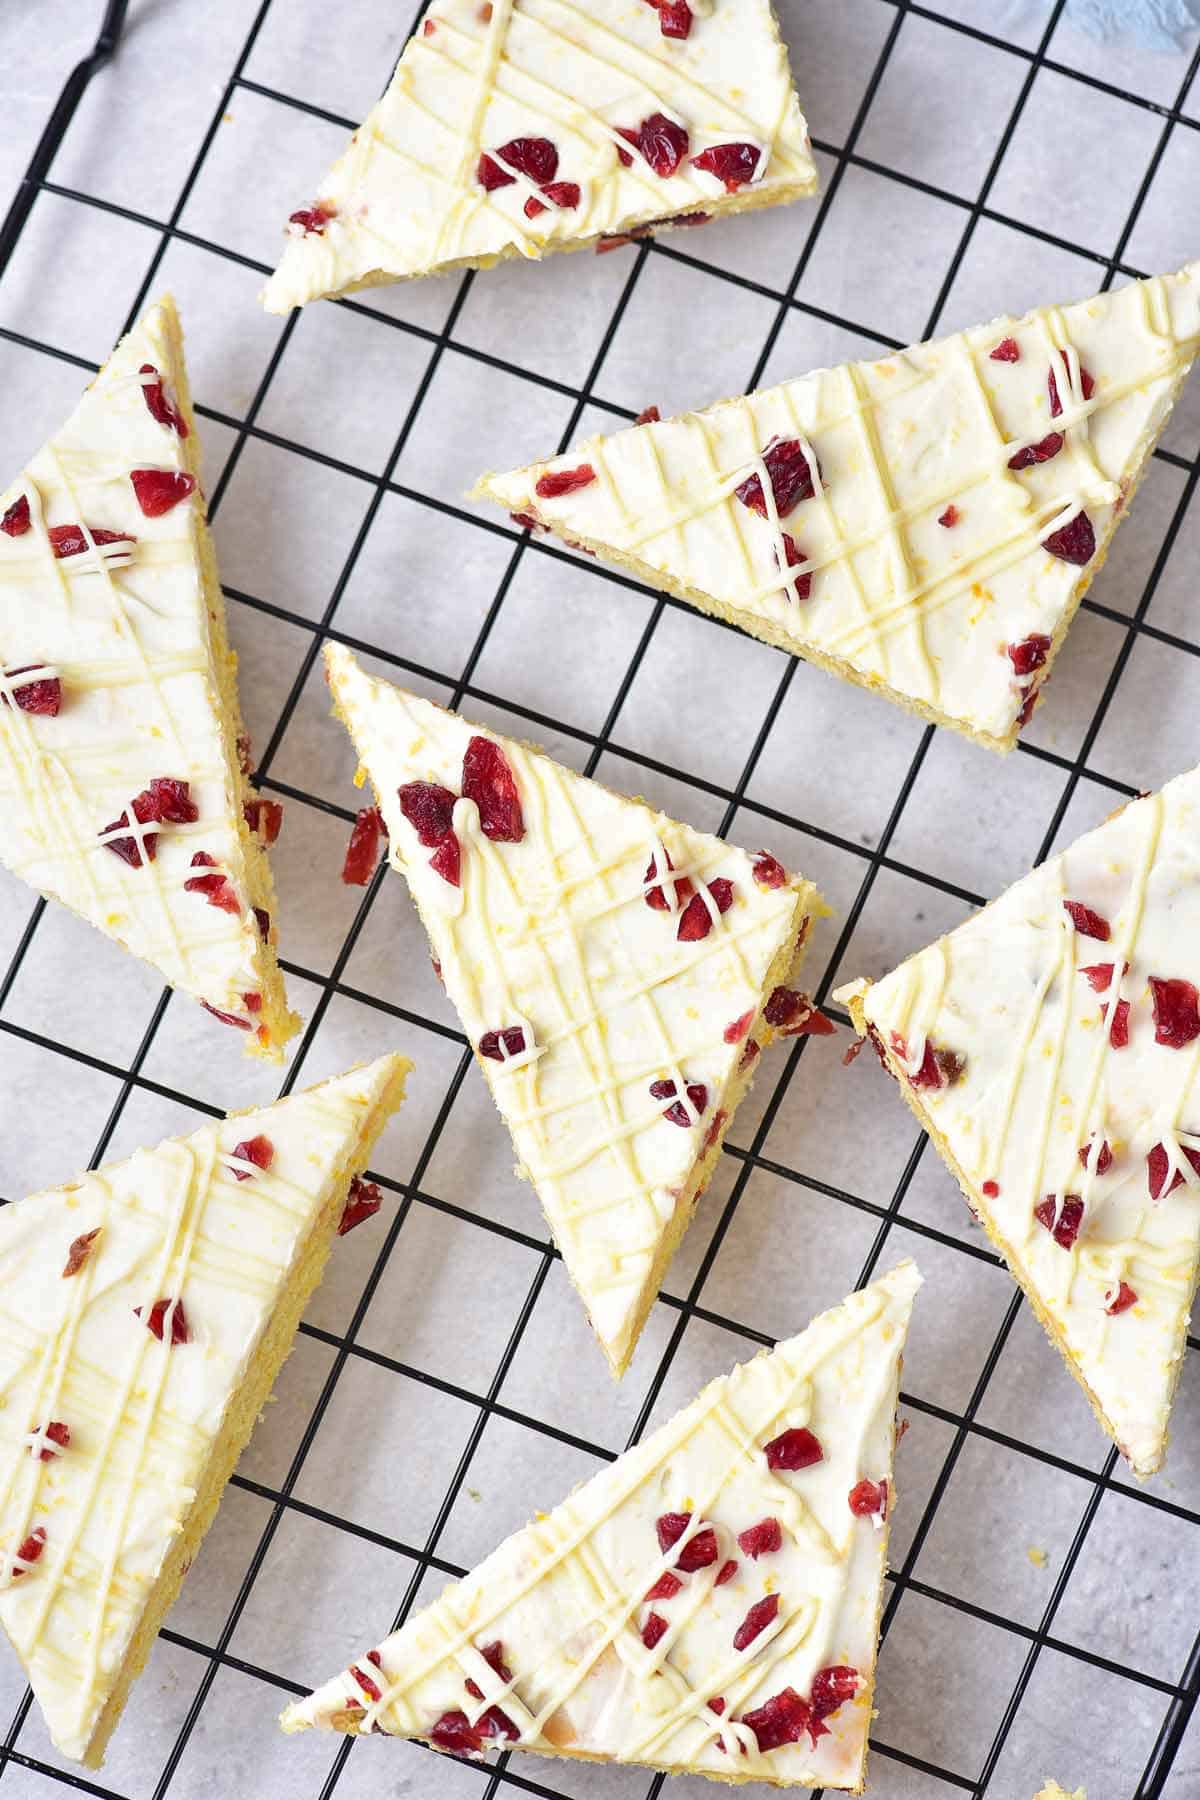 Seven cranberry bars drizzled with white chocolate on a cooling rack.